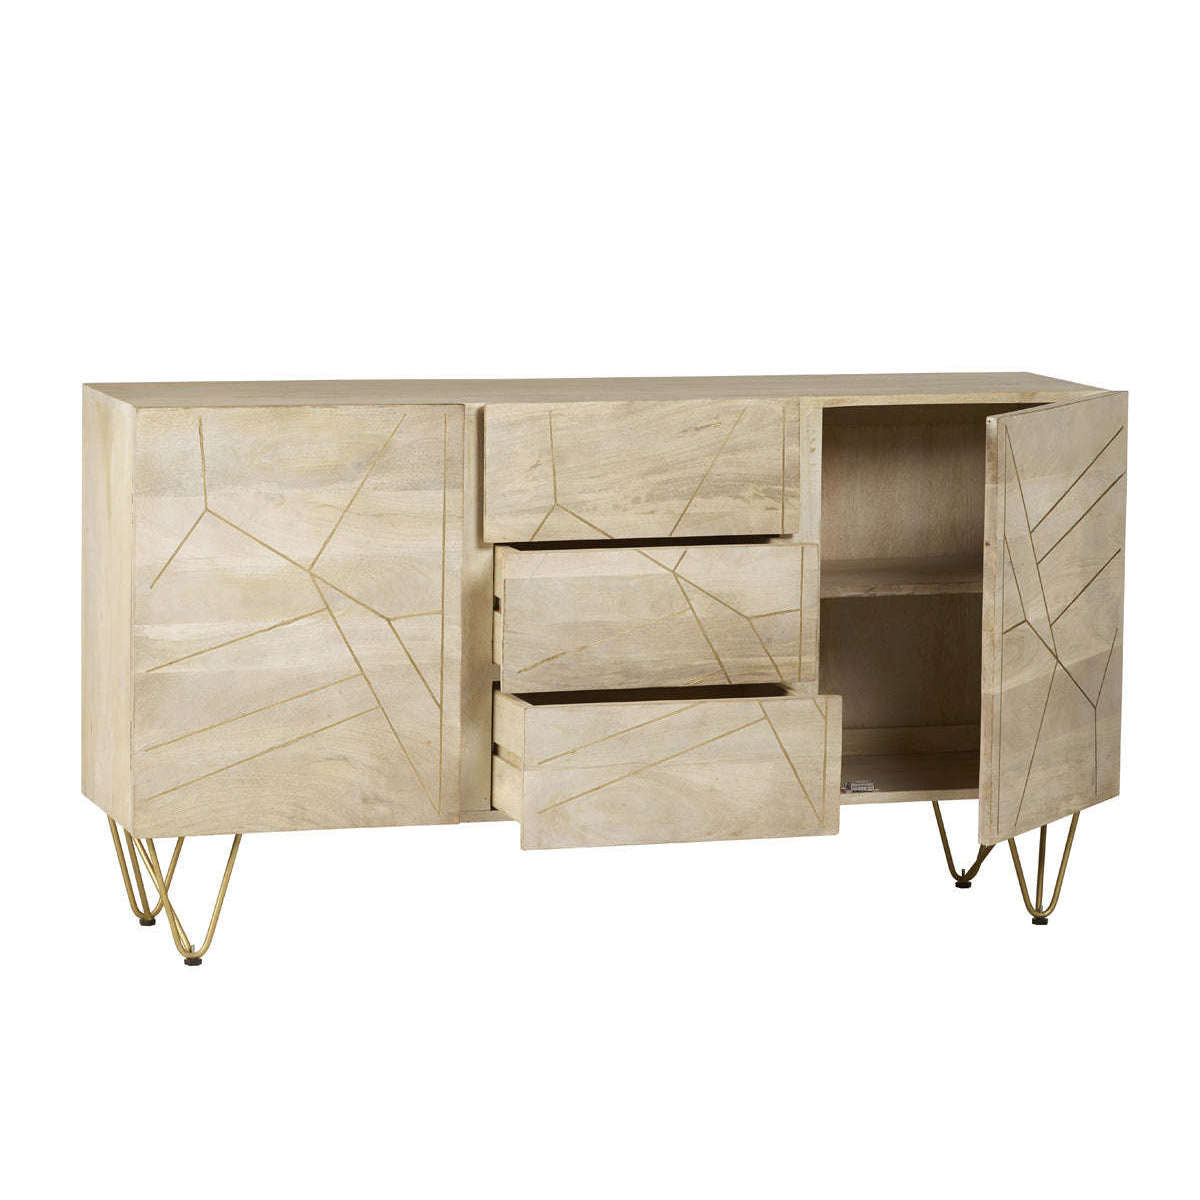 Ashpinoke:Light Gold Extra Large Sideboard 3 Drawers And 2 Doors,Sideboards,Indian Hub